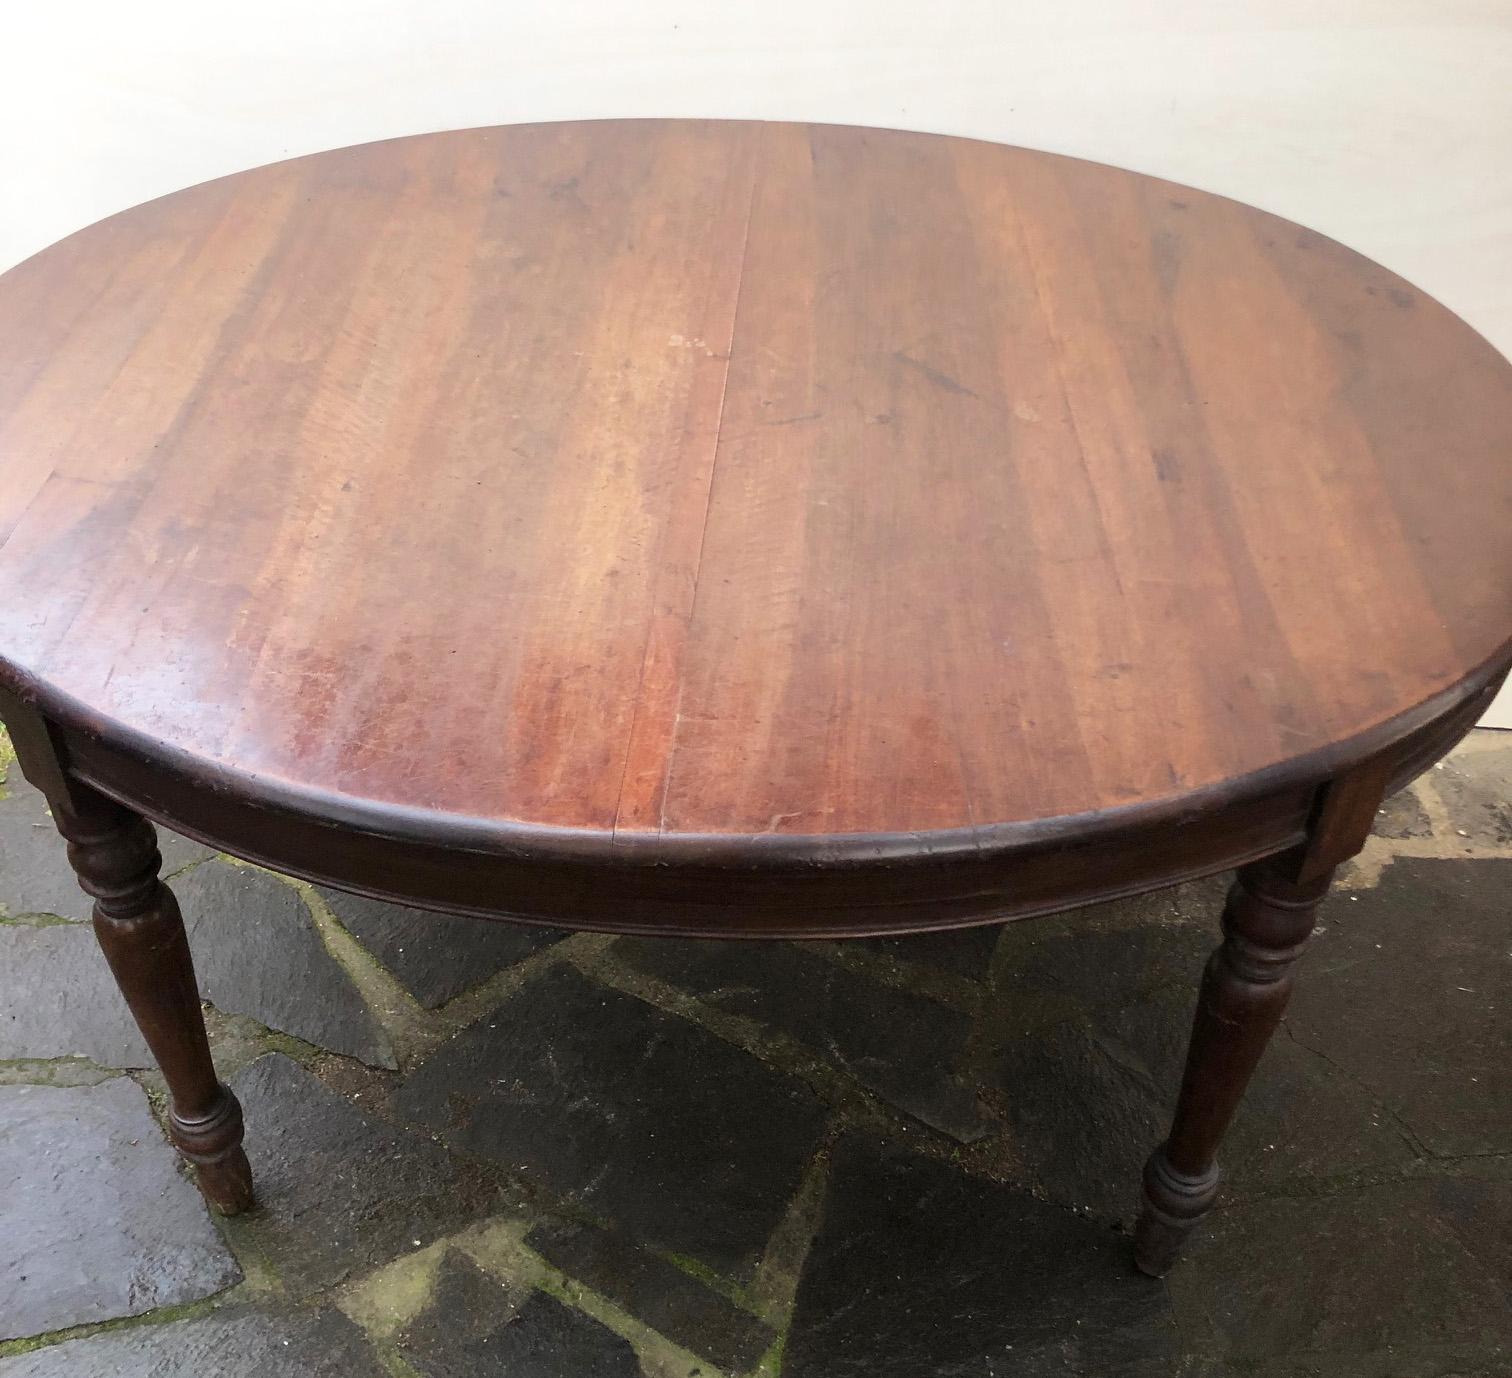 Italian oval table, in solid walnut, with turned leg, from 20th Century, very comfortable.
Original patina paint, wax finish.
Comes from an old country house in the Buggiano area of Tuscany.
The paint is original in patina, honey amber color. 
As